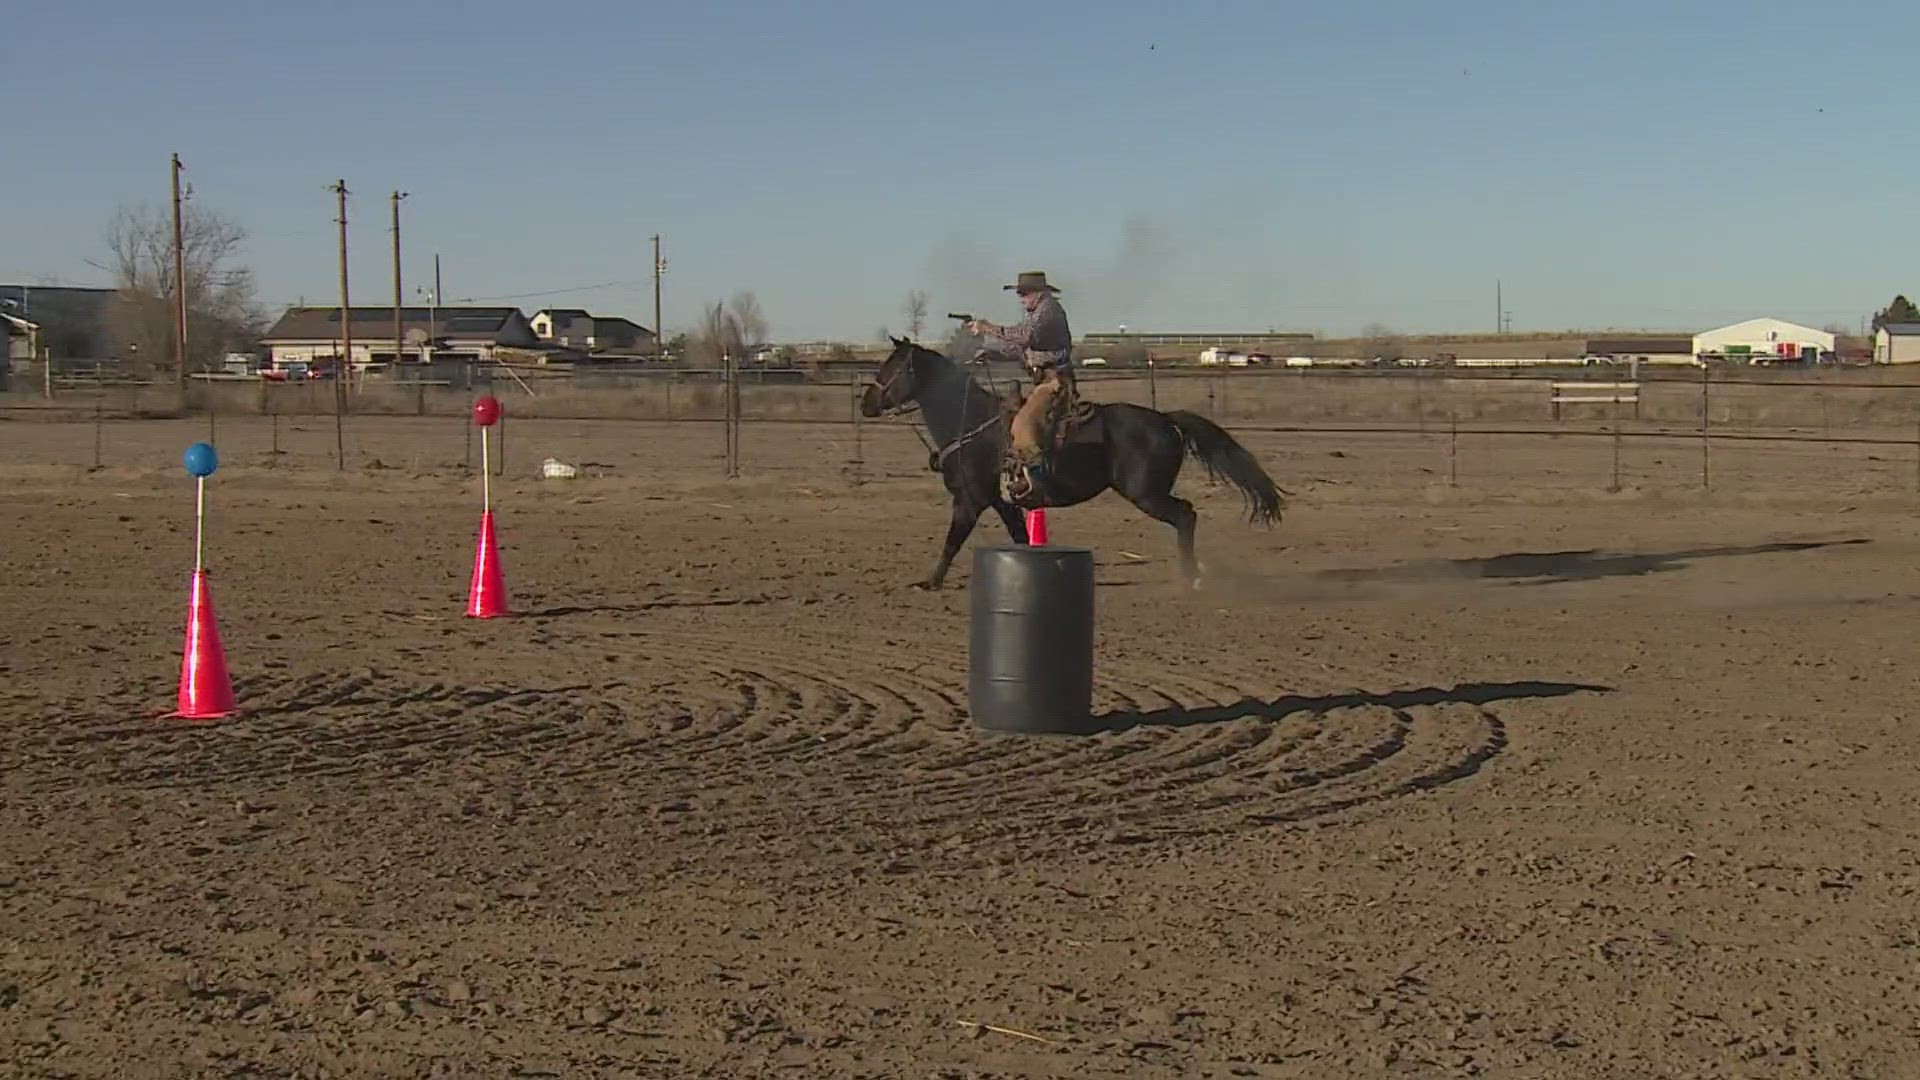 Cowboy Mounted Shooting is returning to the National Western Stock Show this week after a six year hiatus.